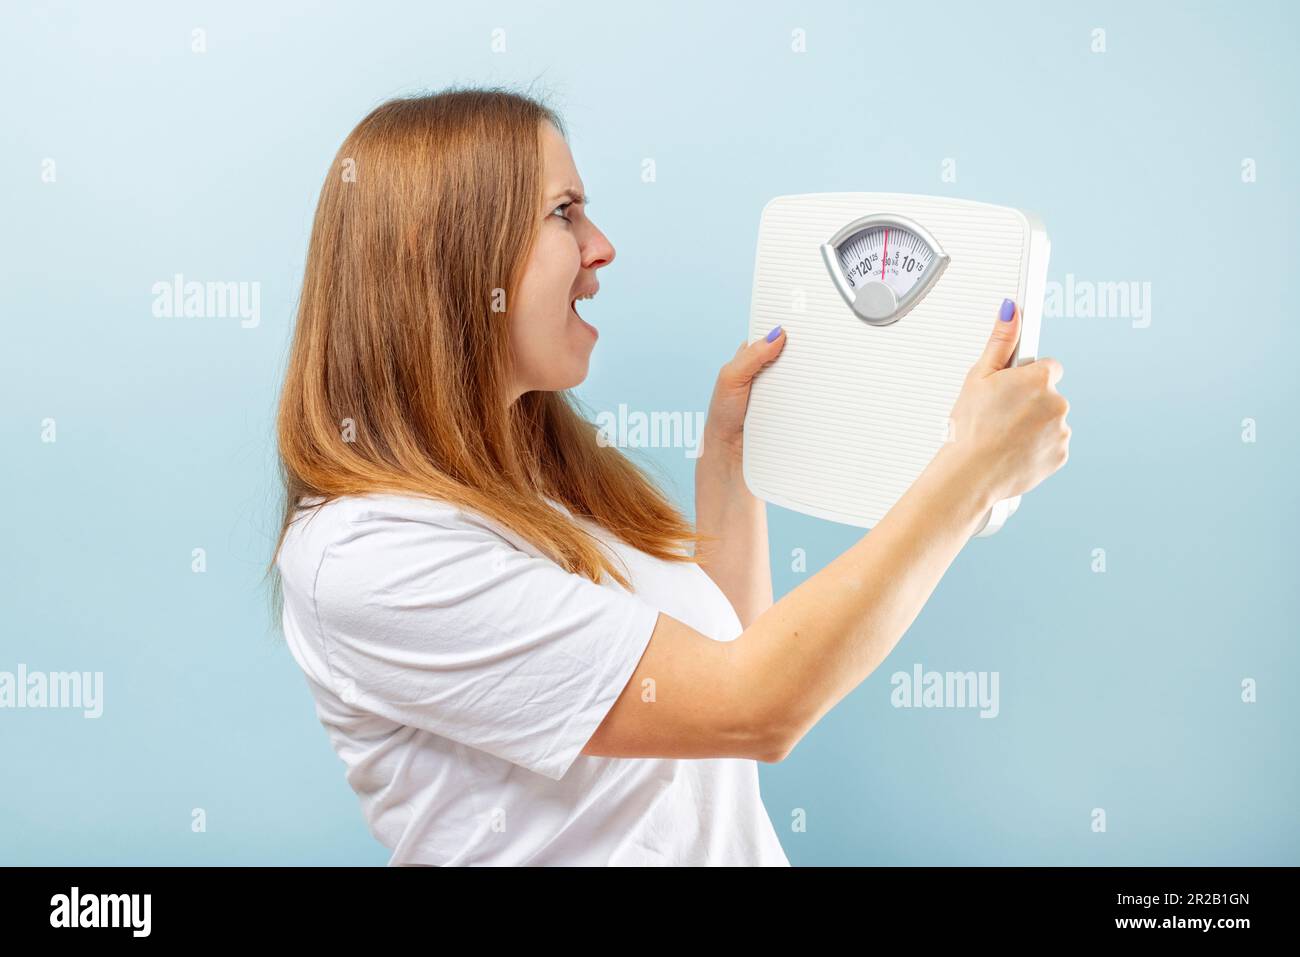 https://c8.alamy.com/comp/2R2B1GN/young-brunette-woman-looking-at-weight-scale-in-shock-on-blue-background-2R2B1GN.jpg